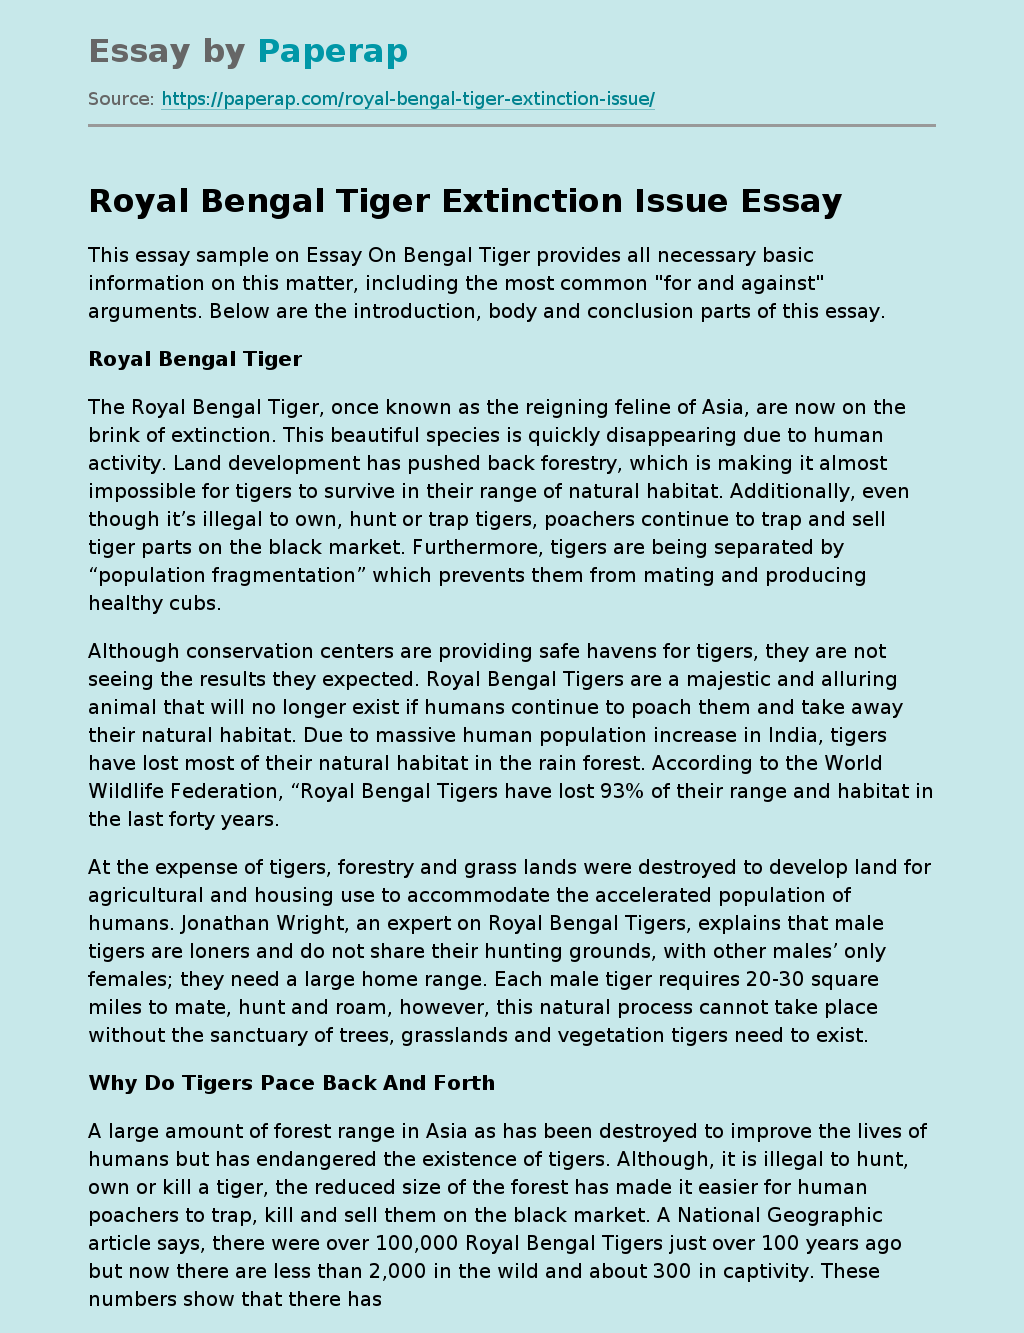 Royal Bengal Tiger Extinction Issue